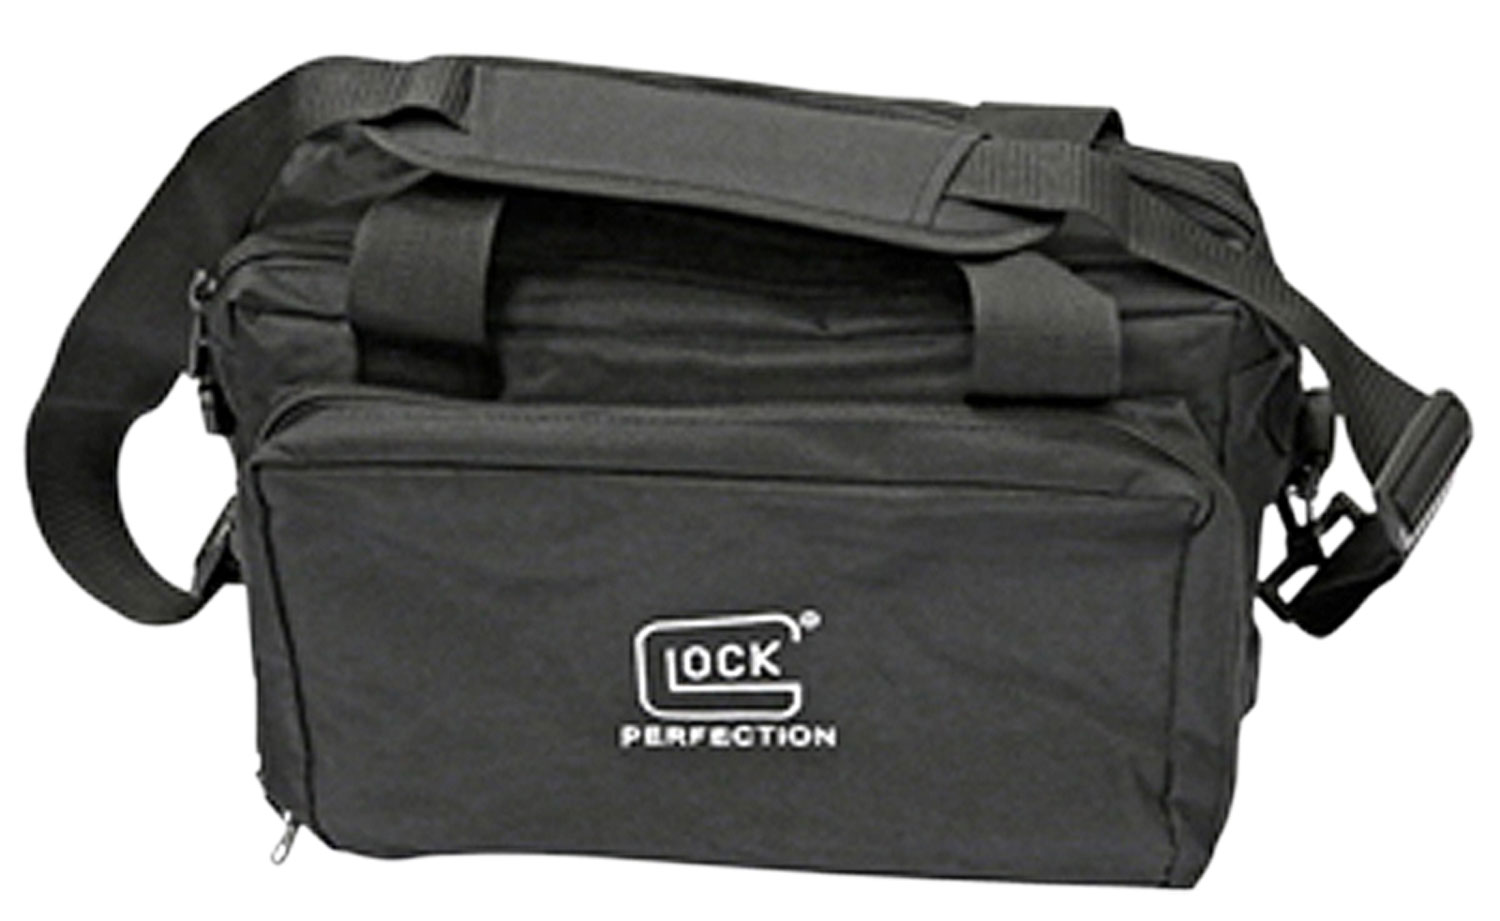 Glock AP60219 Range Bag  Water Resistant Black 600D Polyester with Zippered Pouch, Mag Storage Pockets, & 2